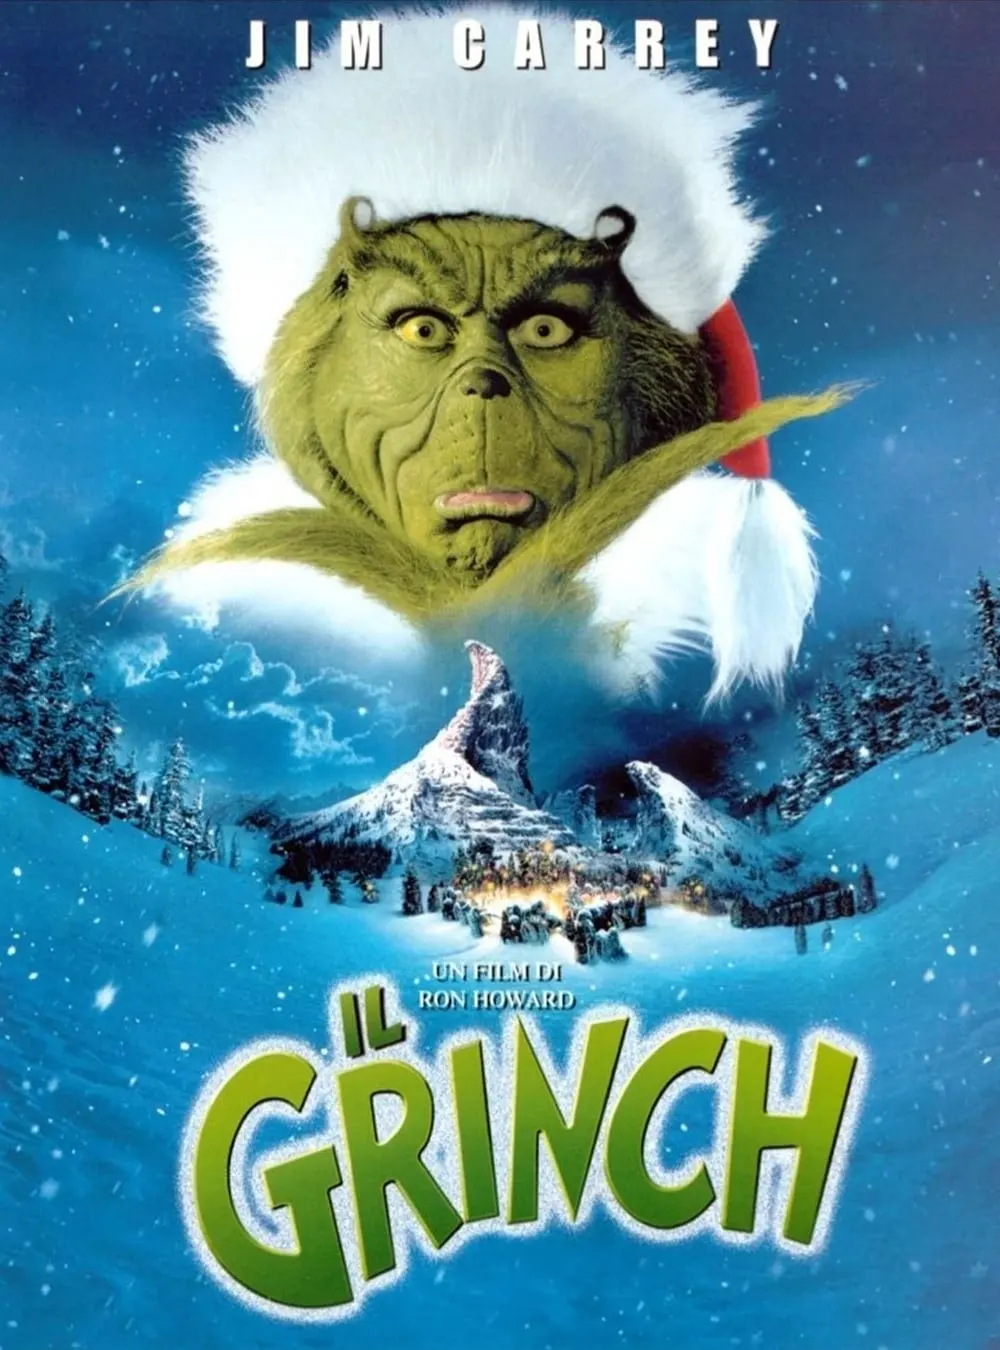 Best Christmas animated movies - How the Grinch Stole Christmas